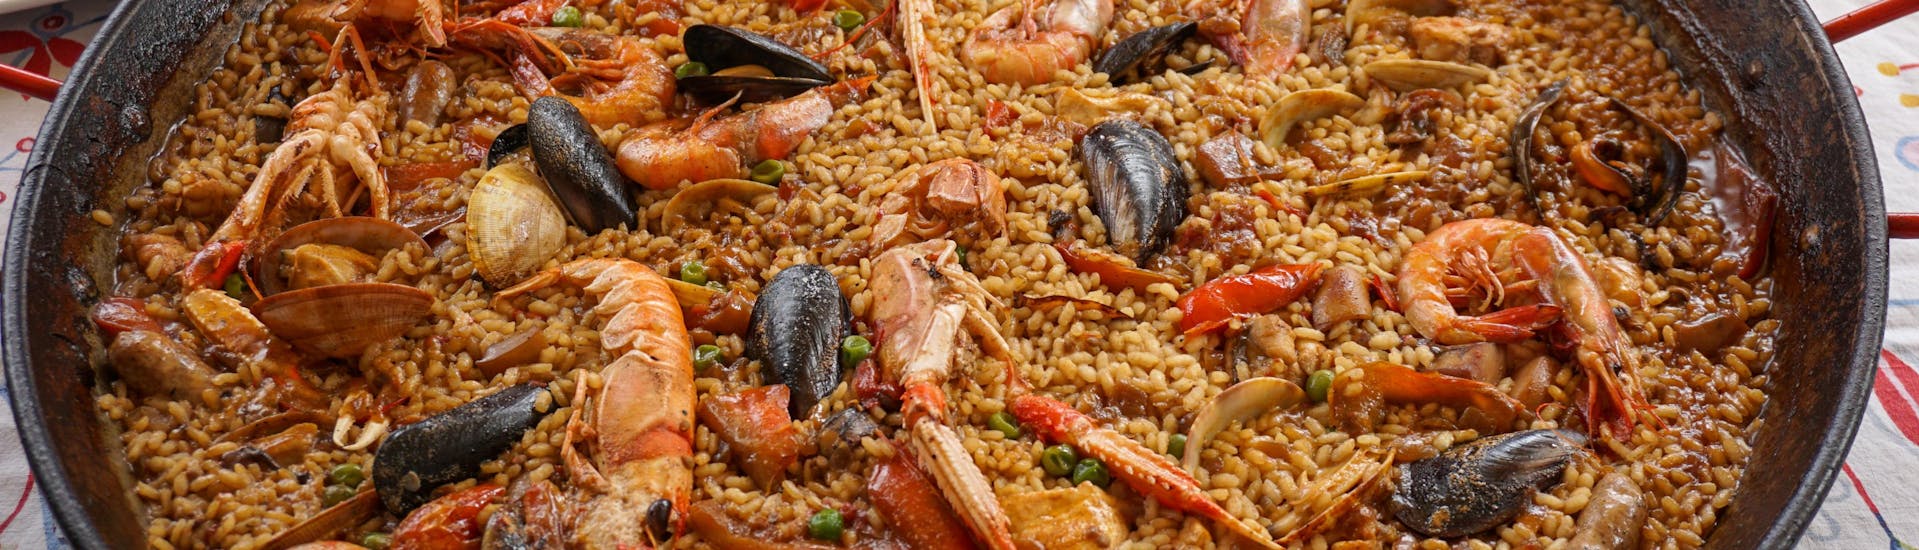 A paella before being served in a boat trip with Paella.